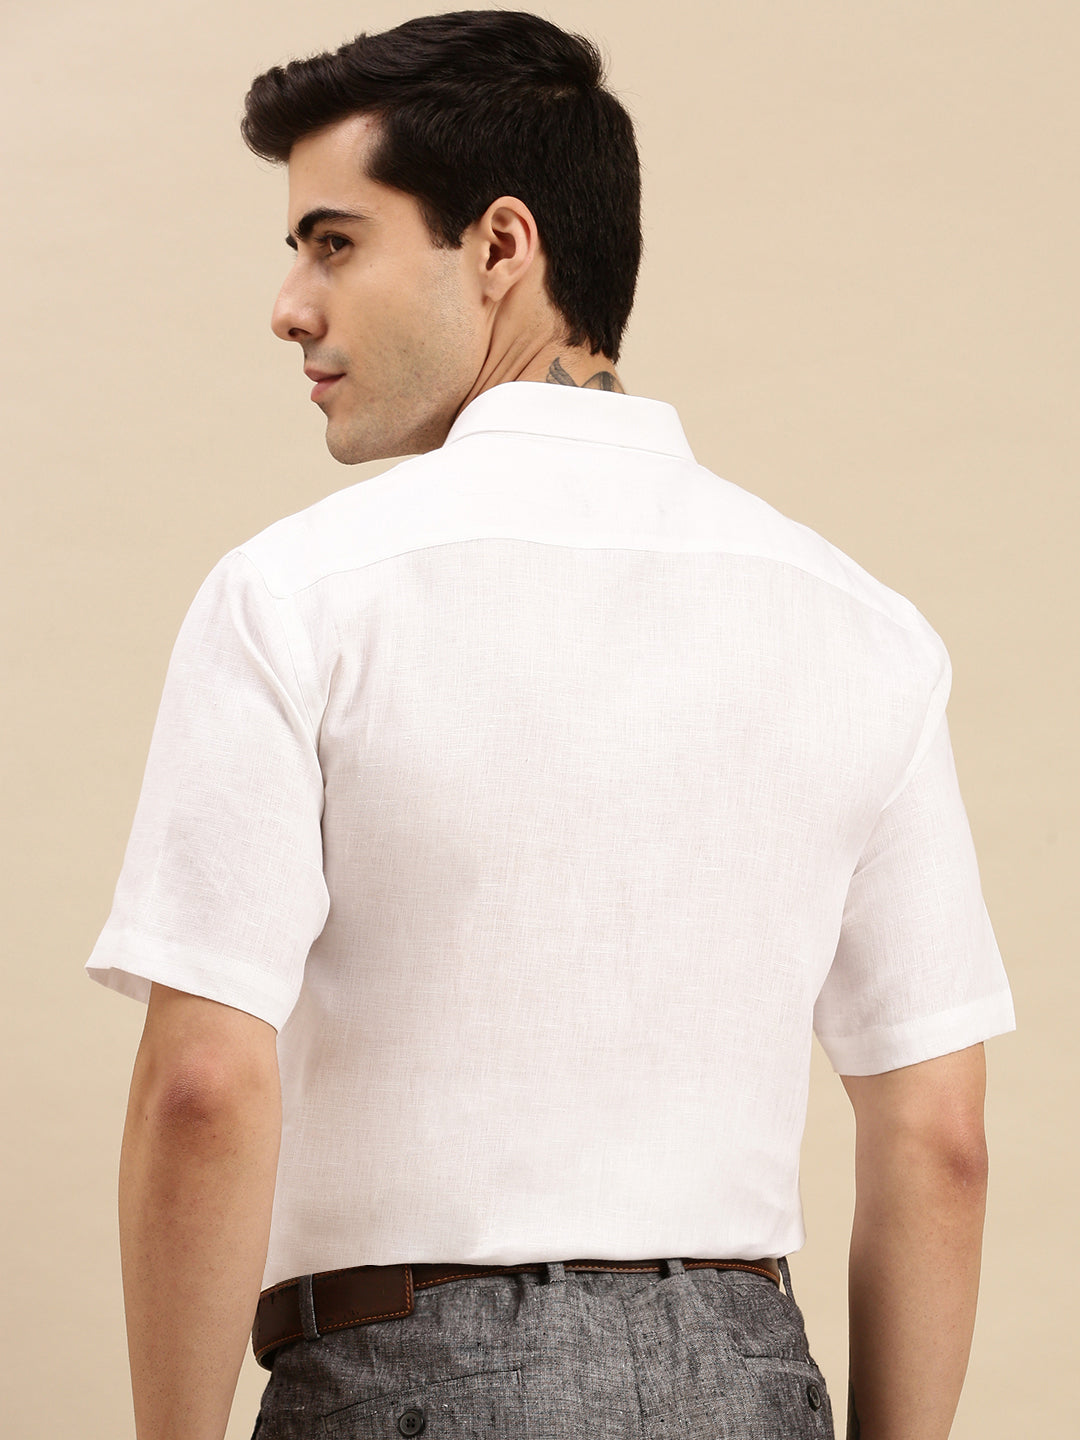 Mens Smart Fit Cotton White Shirt Half Sleeves Challenge -Back view